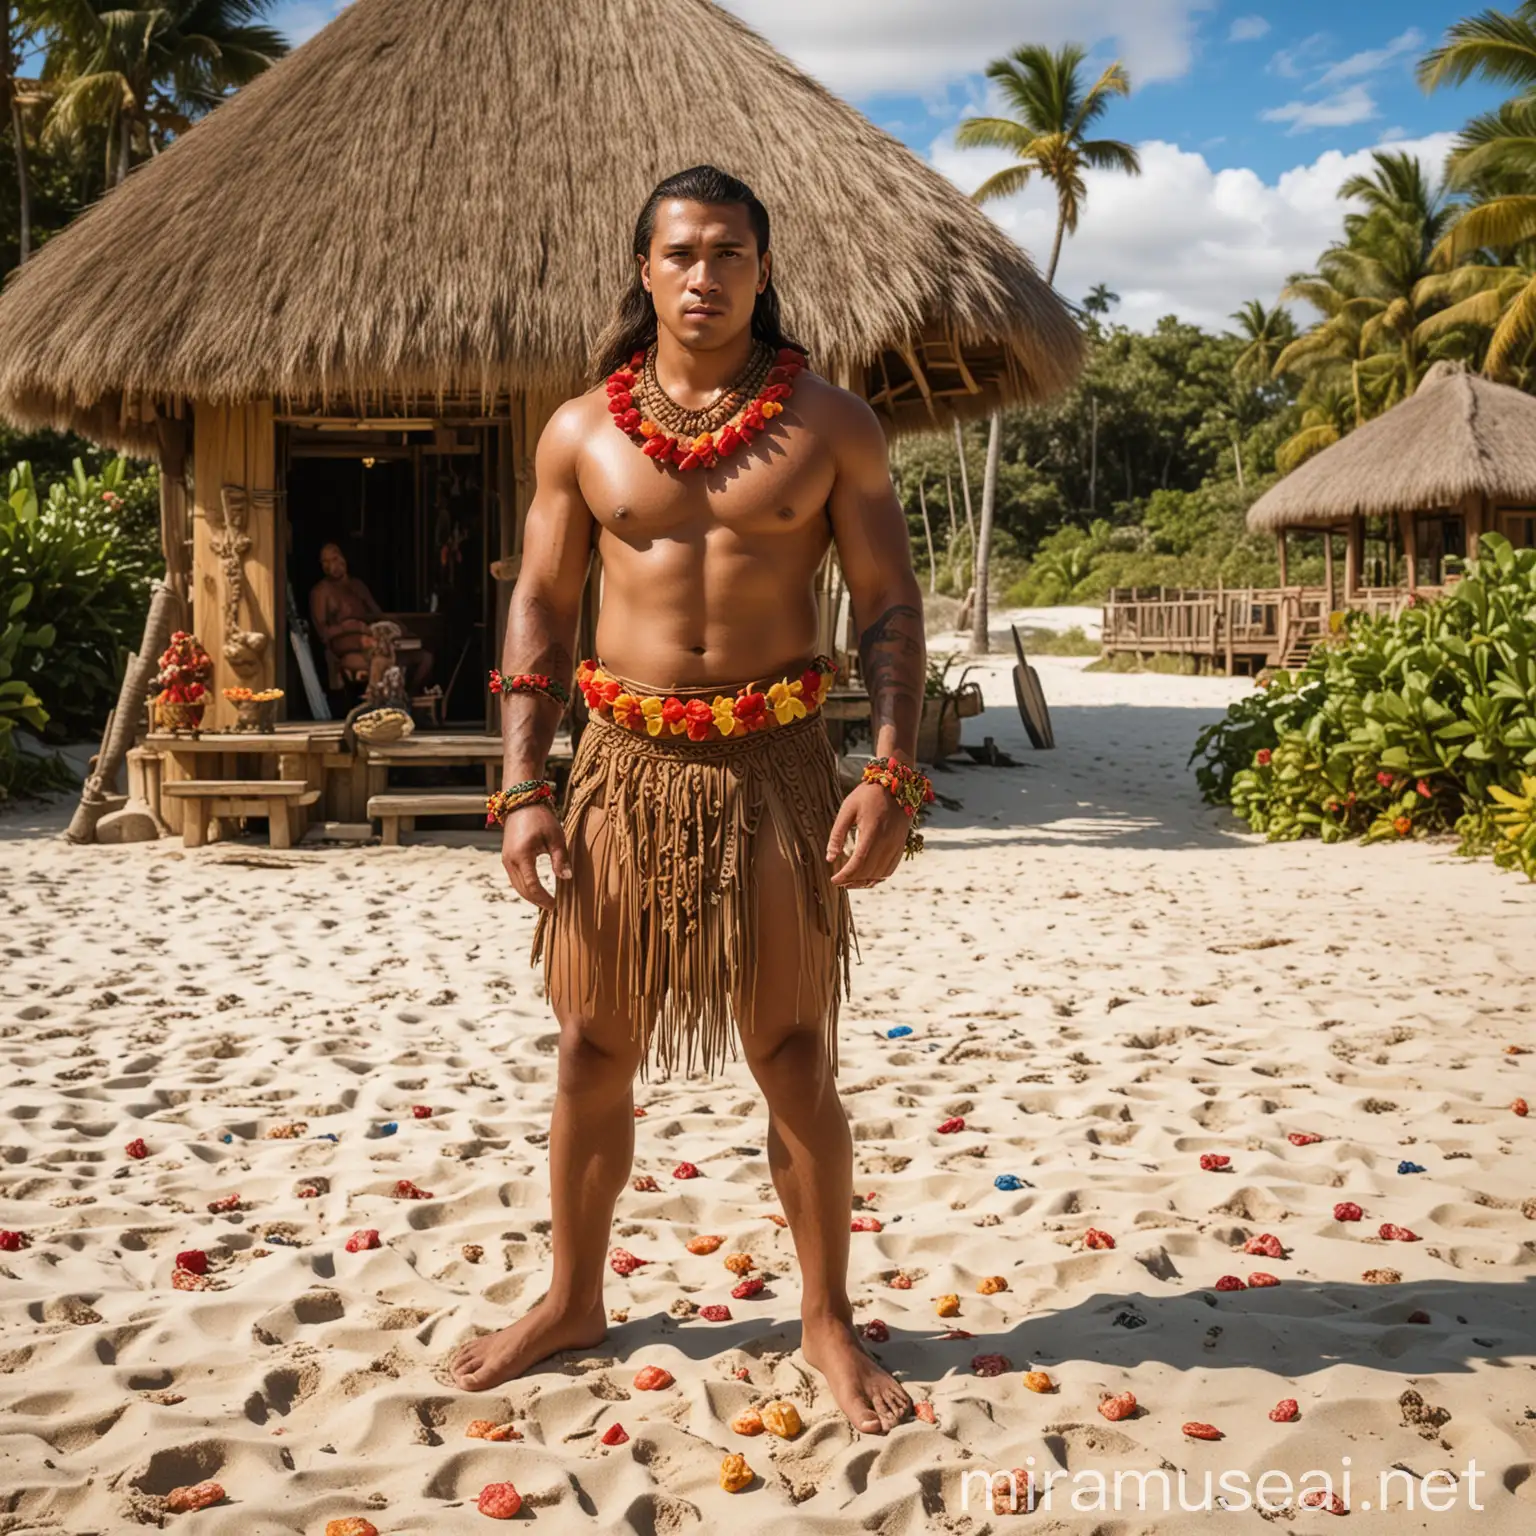 a Polynesian warrior is standing on the beach, a tiki hut is in the background, the sand is covered in gummy bears